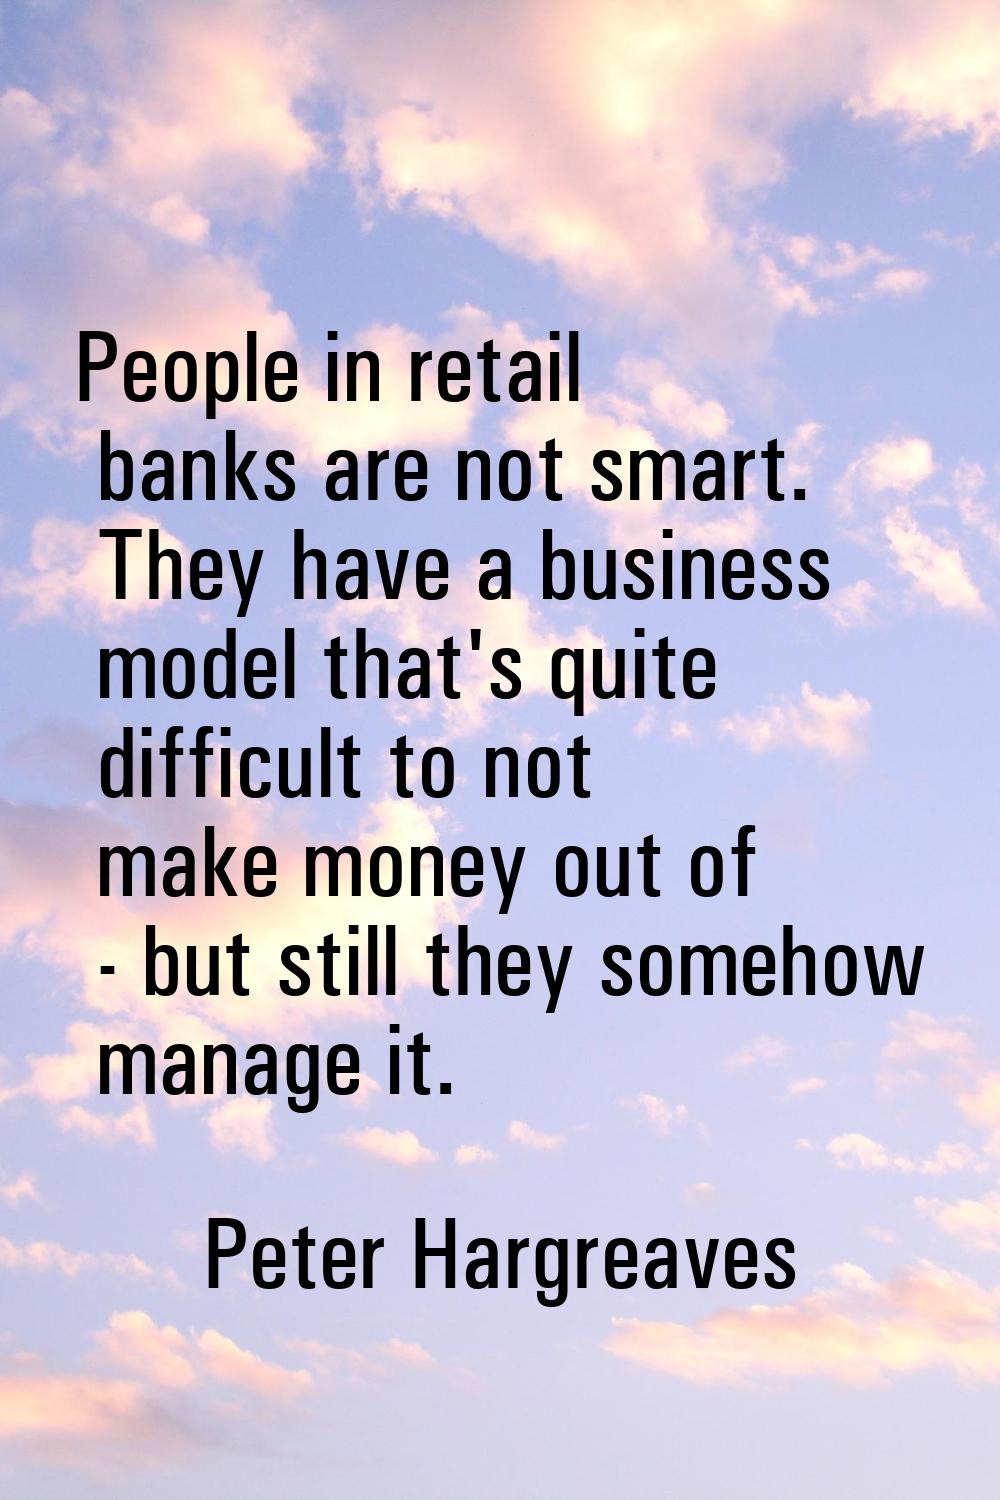 People in retail banks are not smart. They have a business model that's quite difficult to not make